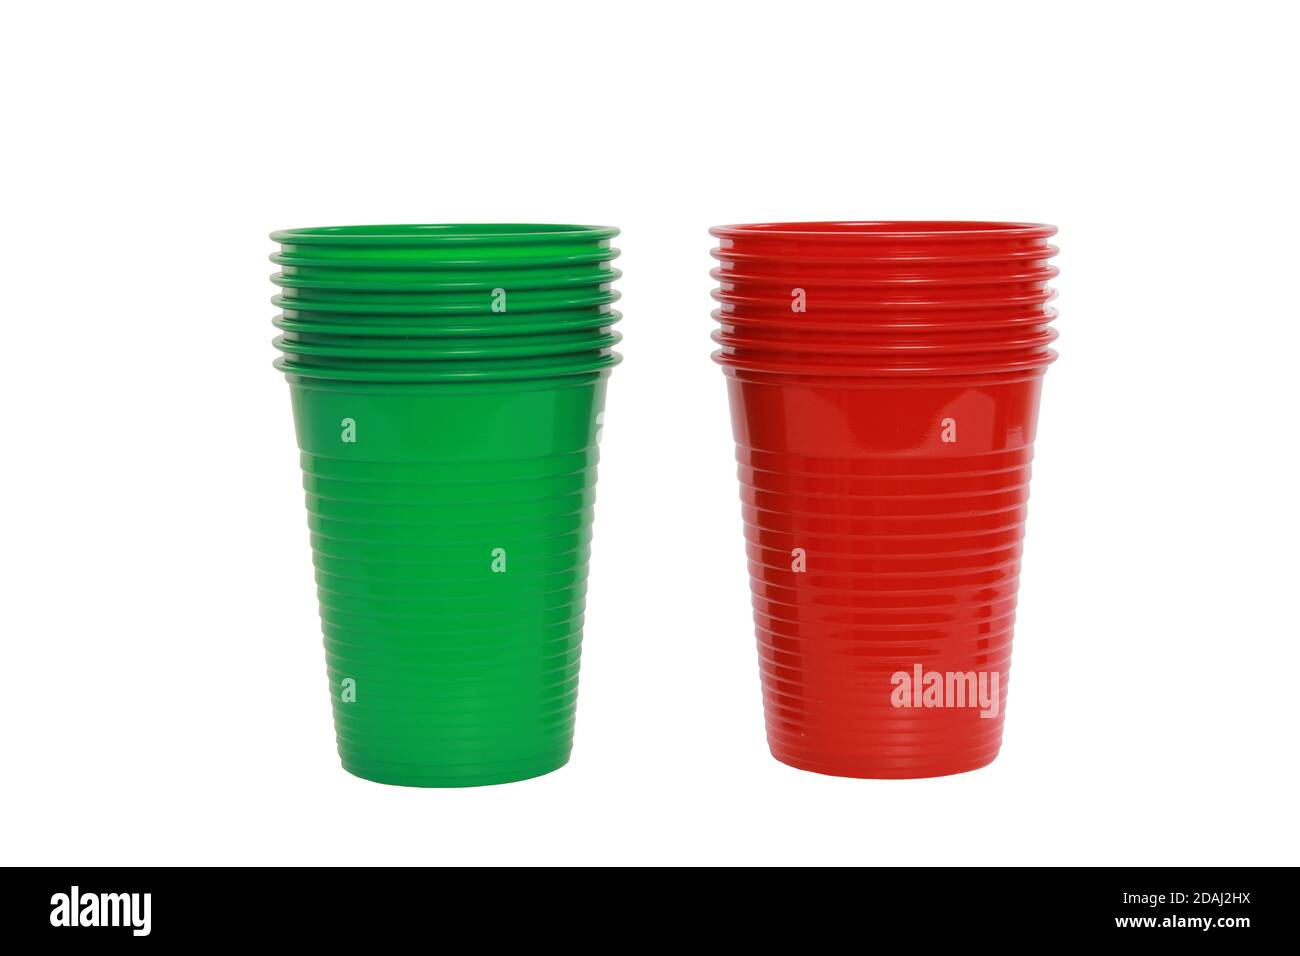 https://c8.alamy.com/comp/2DAJ2HX/closeup-shot-of-stacks-of-red-and-green-plastic-cups-isolated-on-a-white-background-2DAJ2HX.jpg